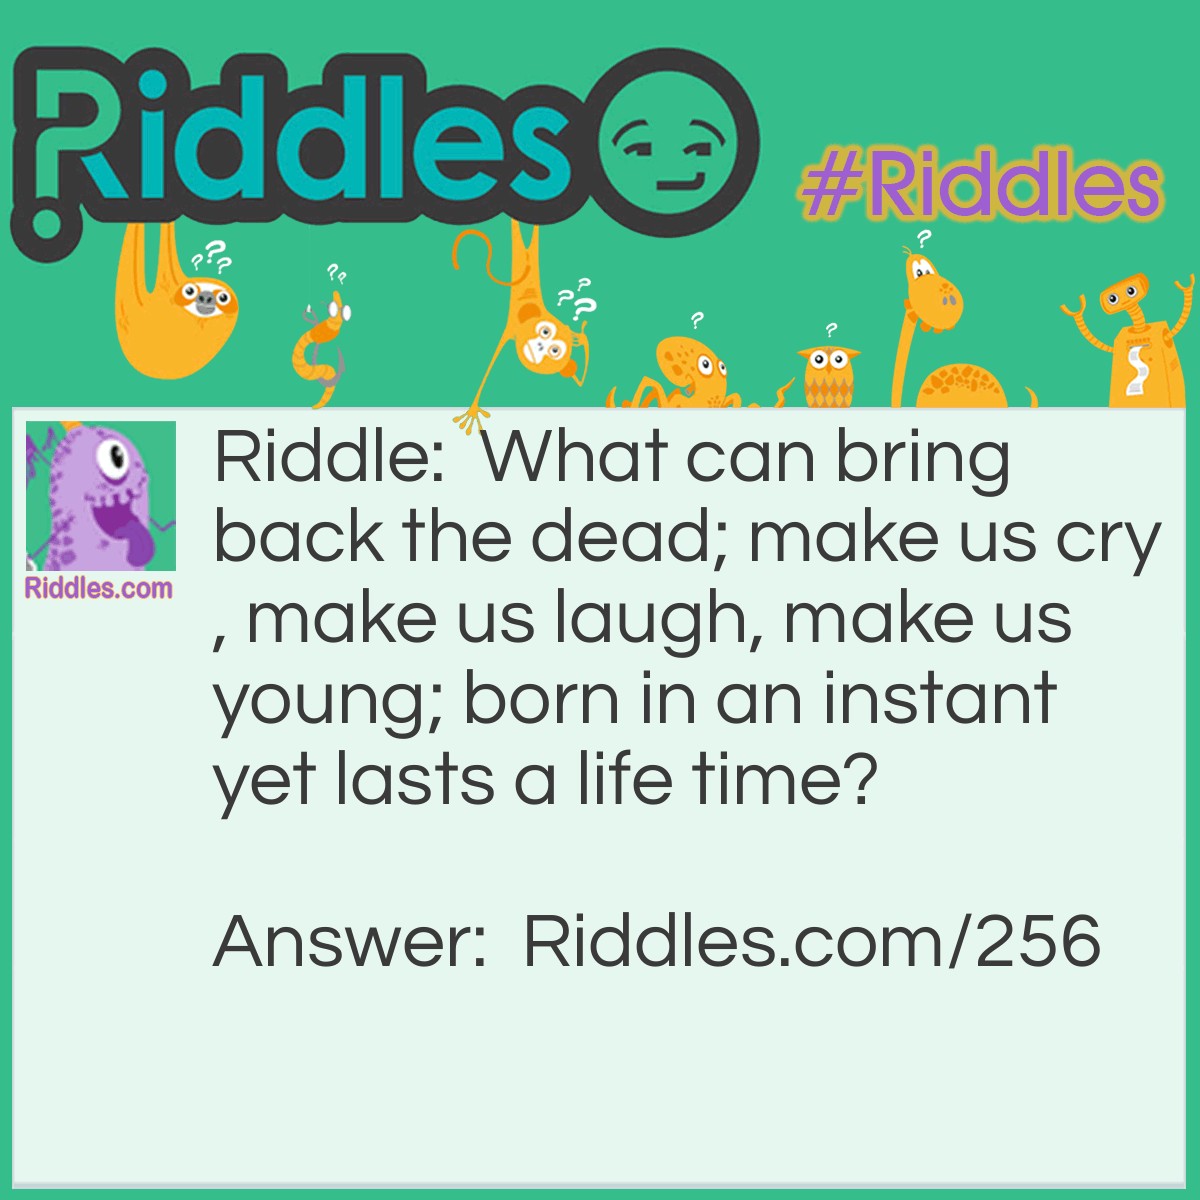 Riddle: What can bring back the dead; make us cry, make us laugh, make us young; born in an instant yet lasts a life time? Answer: Memories.